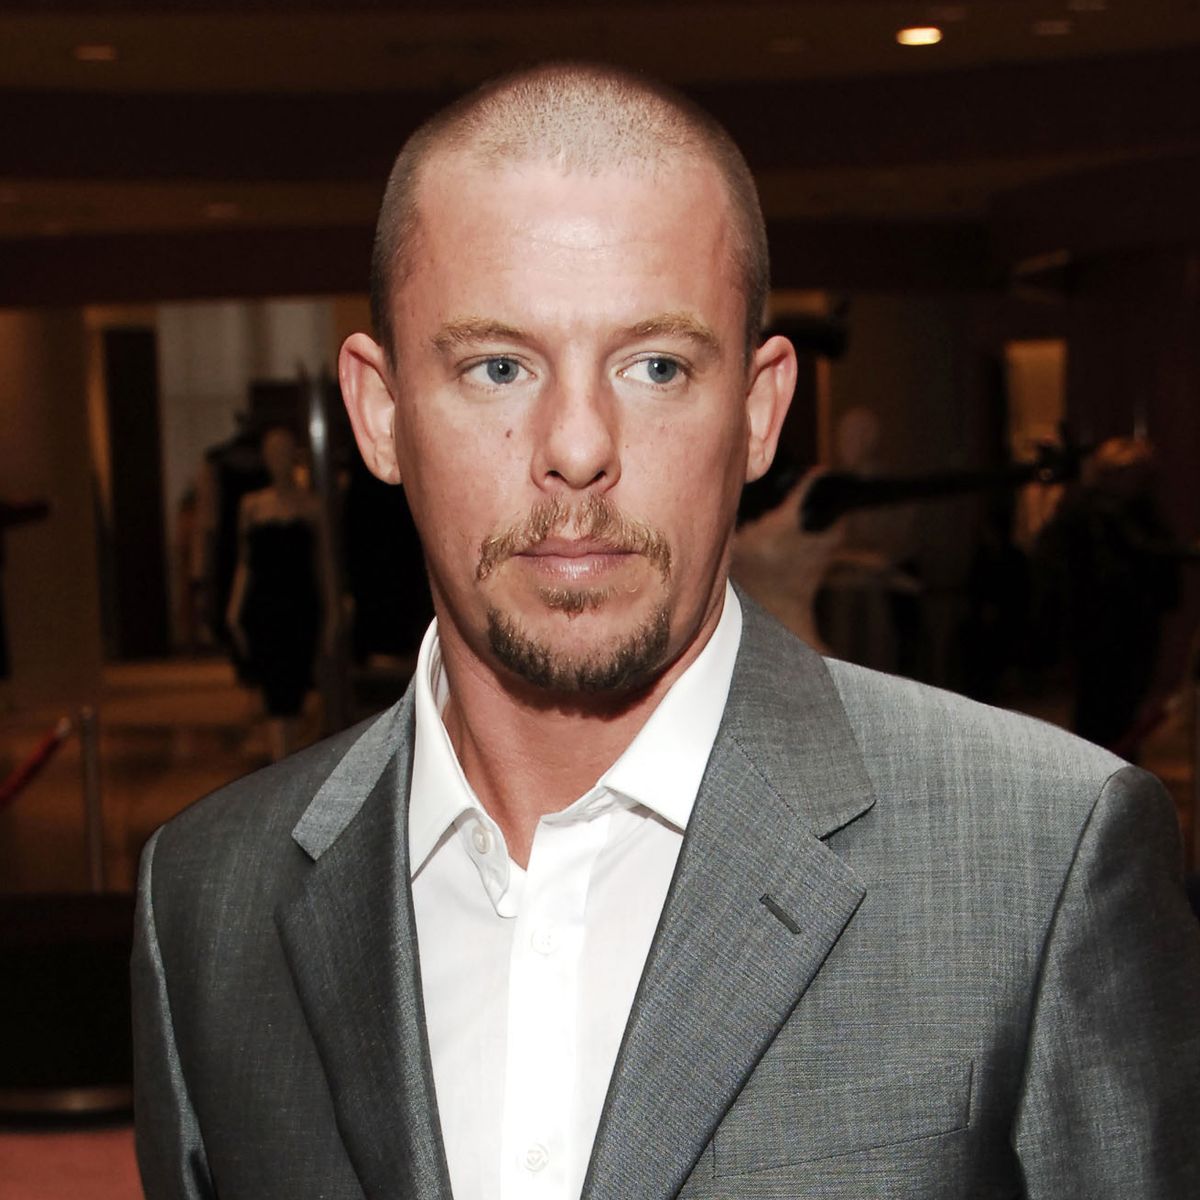 Alexander McQueen Personal Appearance at SAKS Fifth Ave - May 1, 2006Alexander McQueen (Photo by Jemal Countess/WireImage for Saks Fifth Ave - NY)